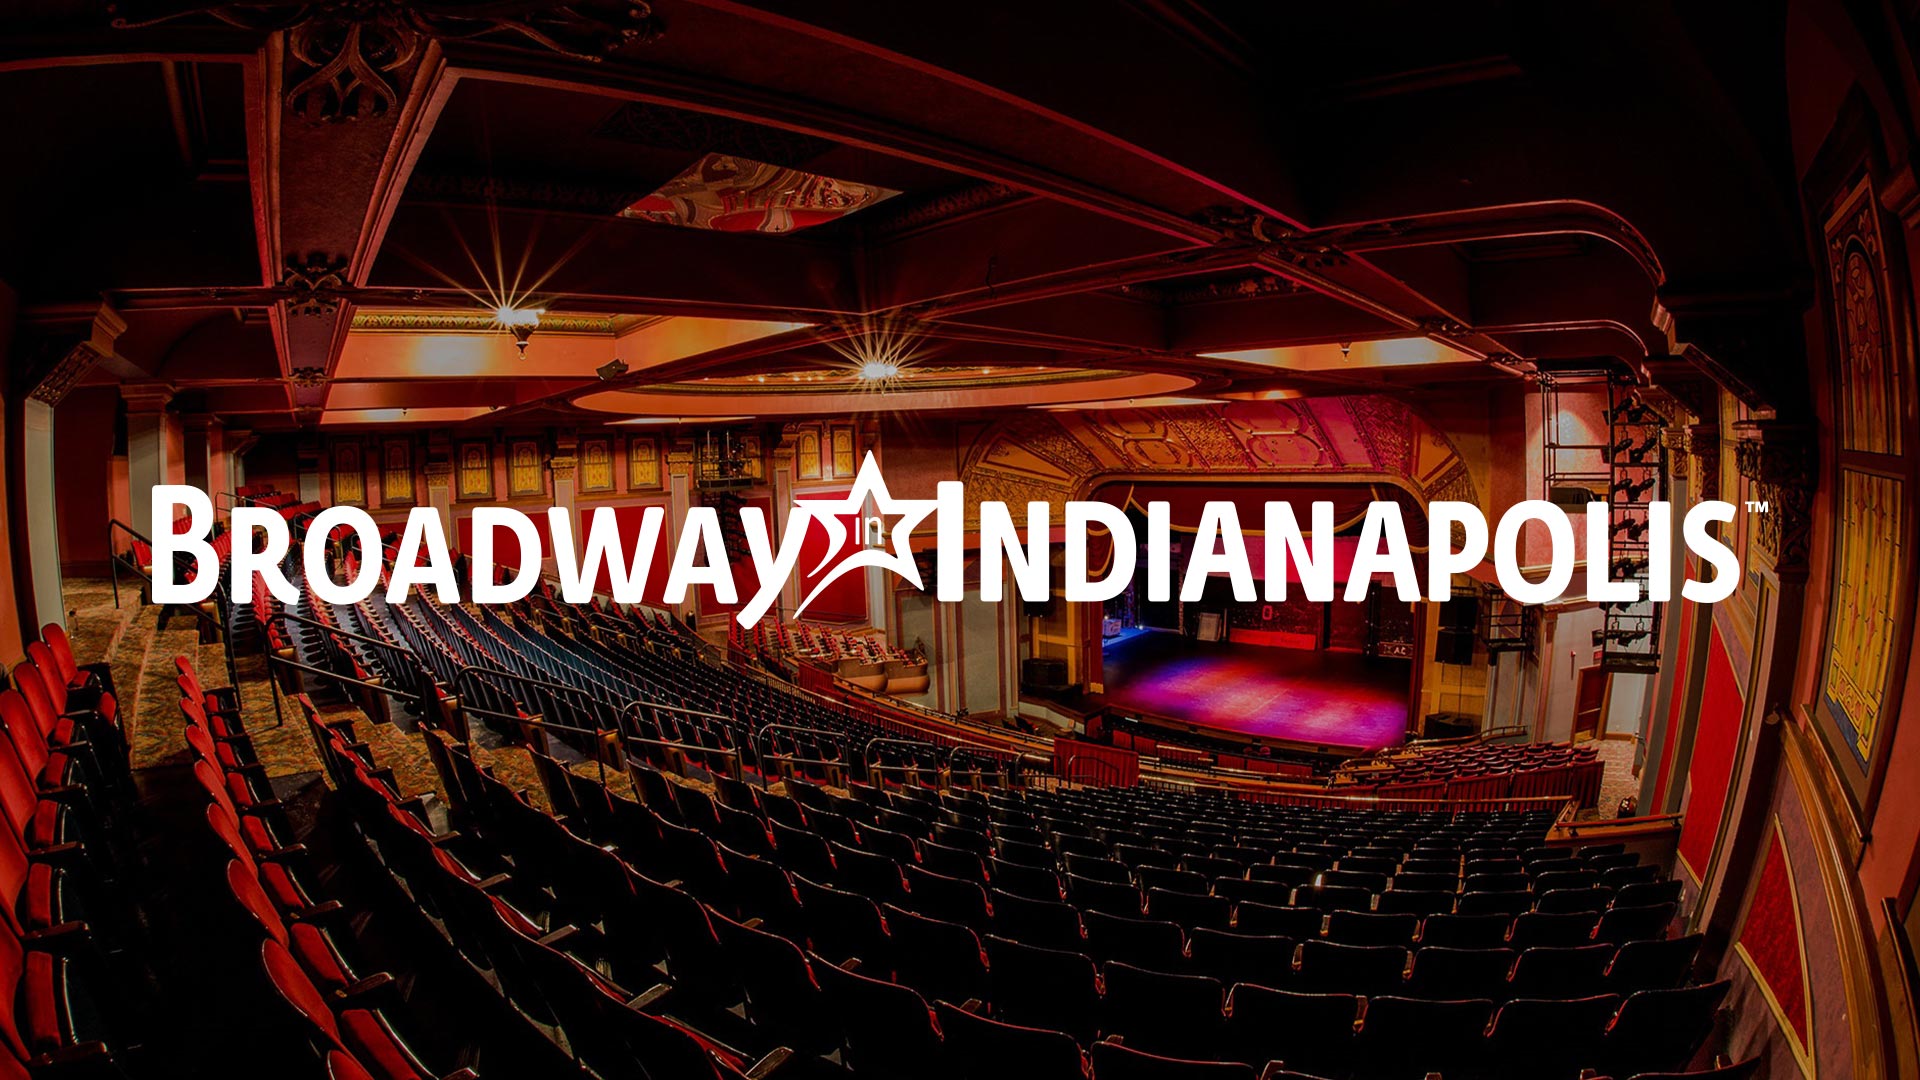 Broadway in Indianapolis logo overlaid on a photo of the Murat Theatre at Old National Centre